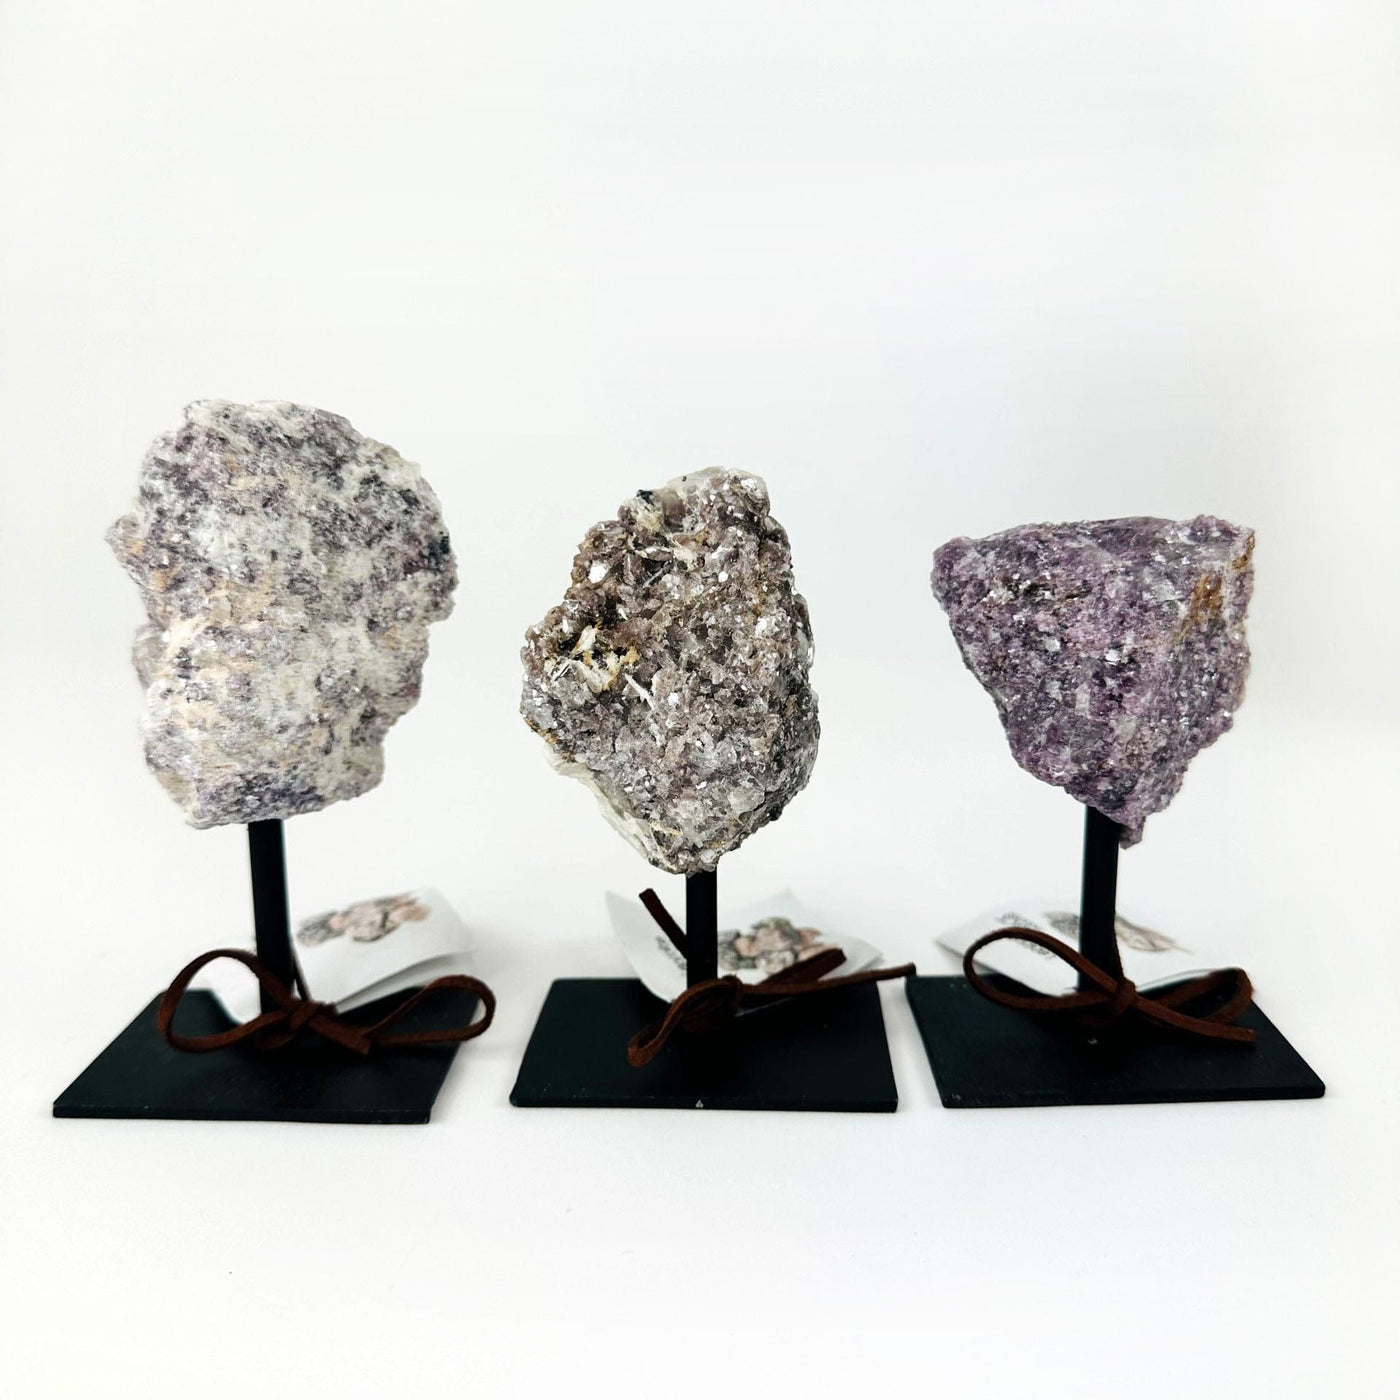 3 Lepidolite stones on Metal Stands in a row on a table